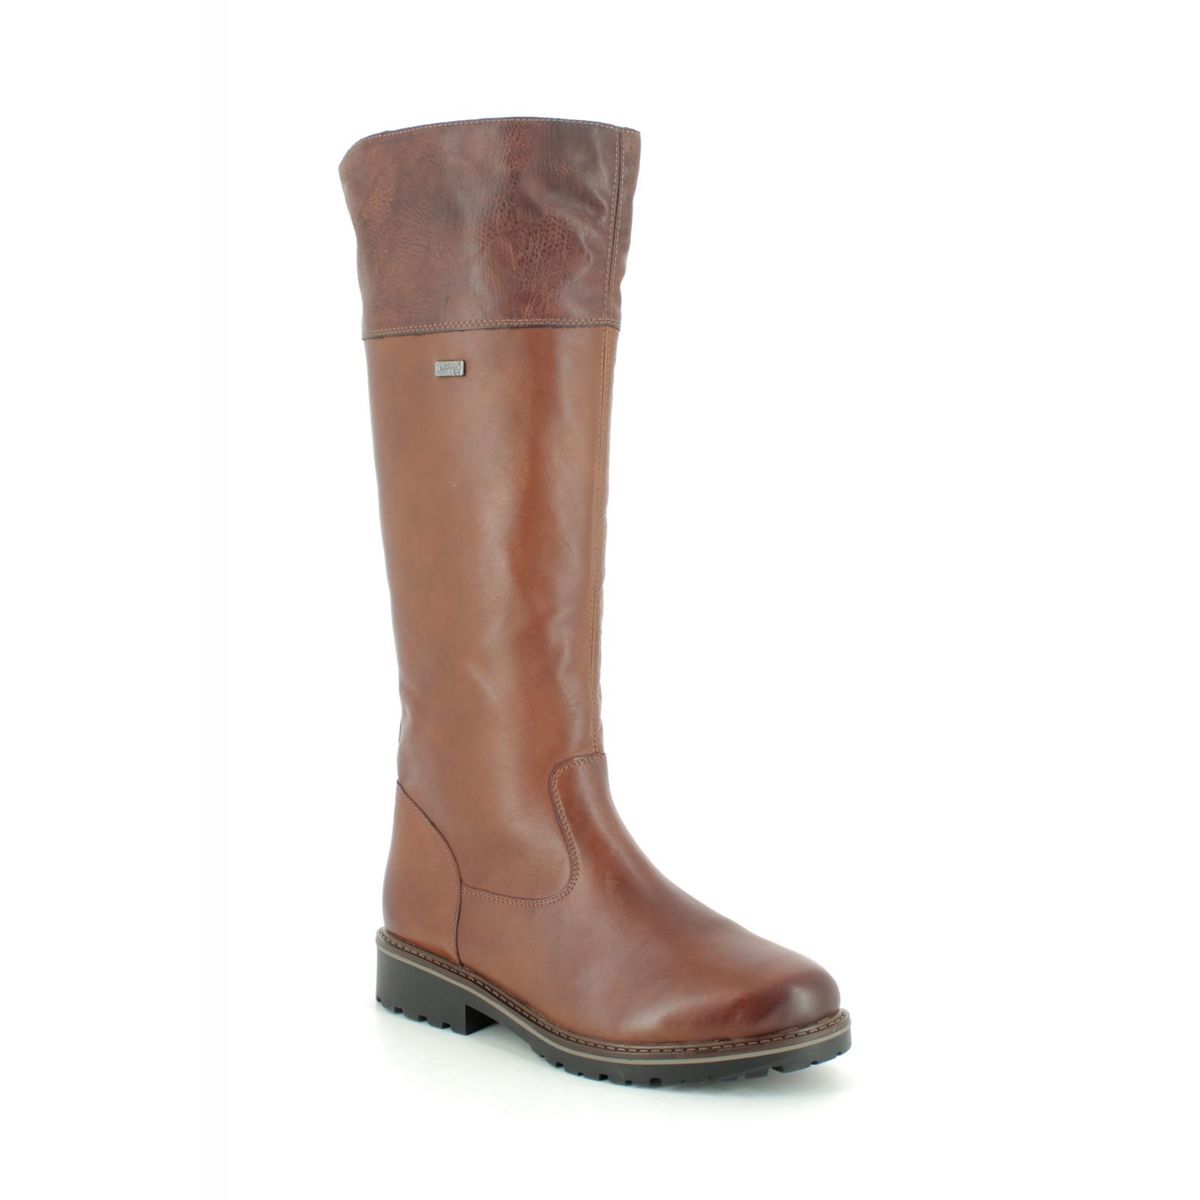 Remonte Indah Tex Tan Leather  Womens Knee-High Boots R6581-22 In Size 39 In Plain Tan Leather